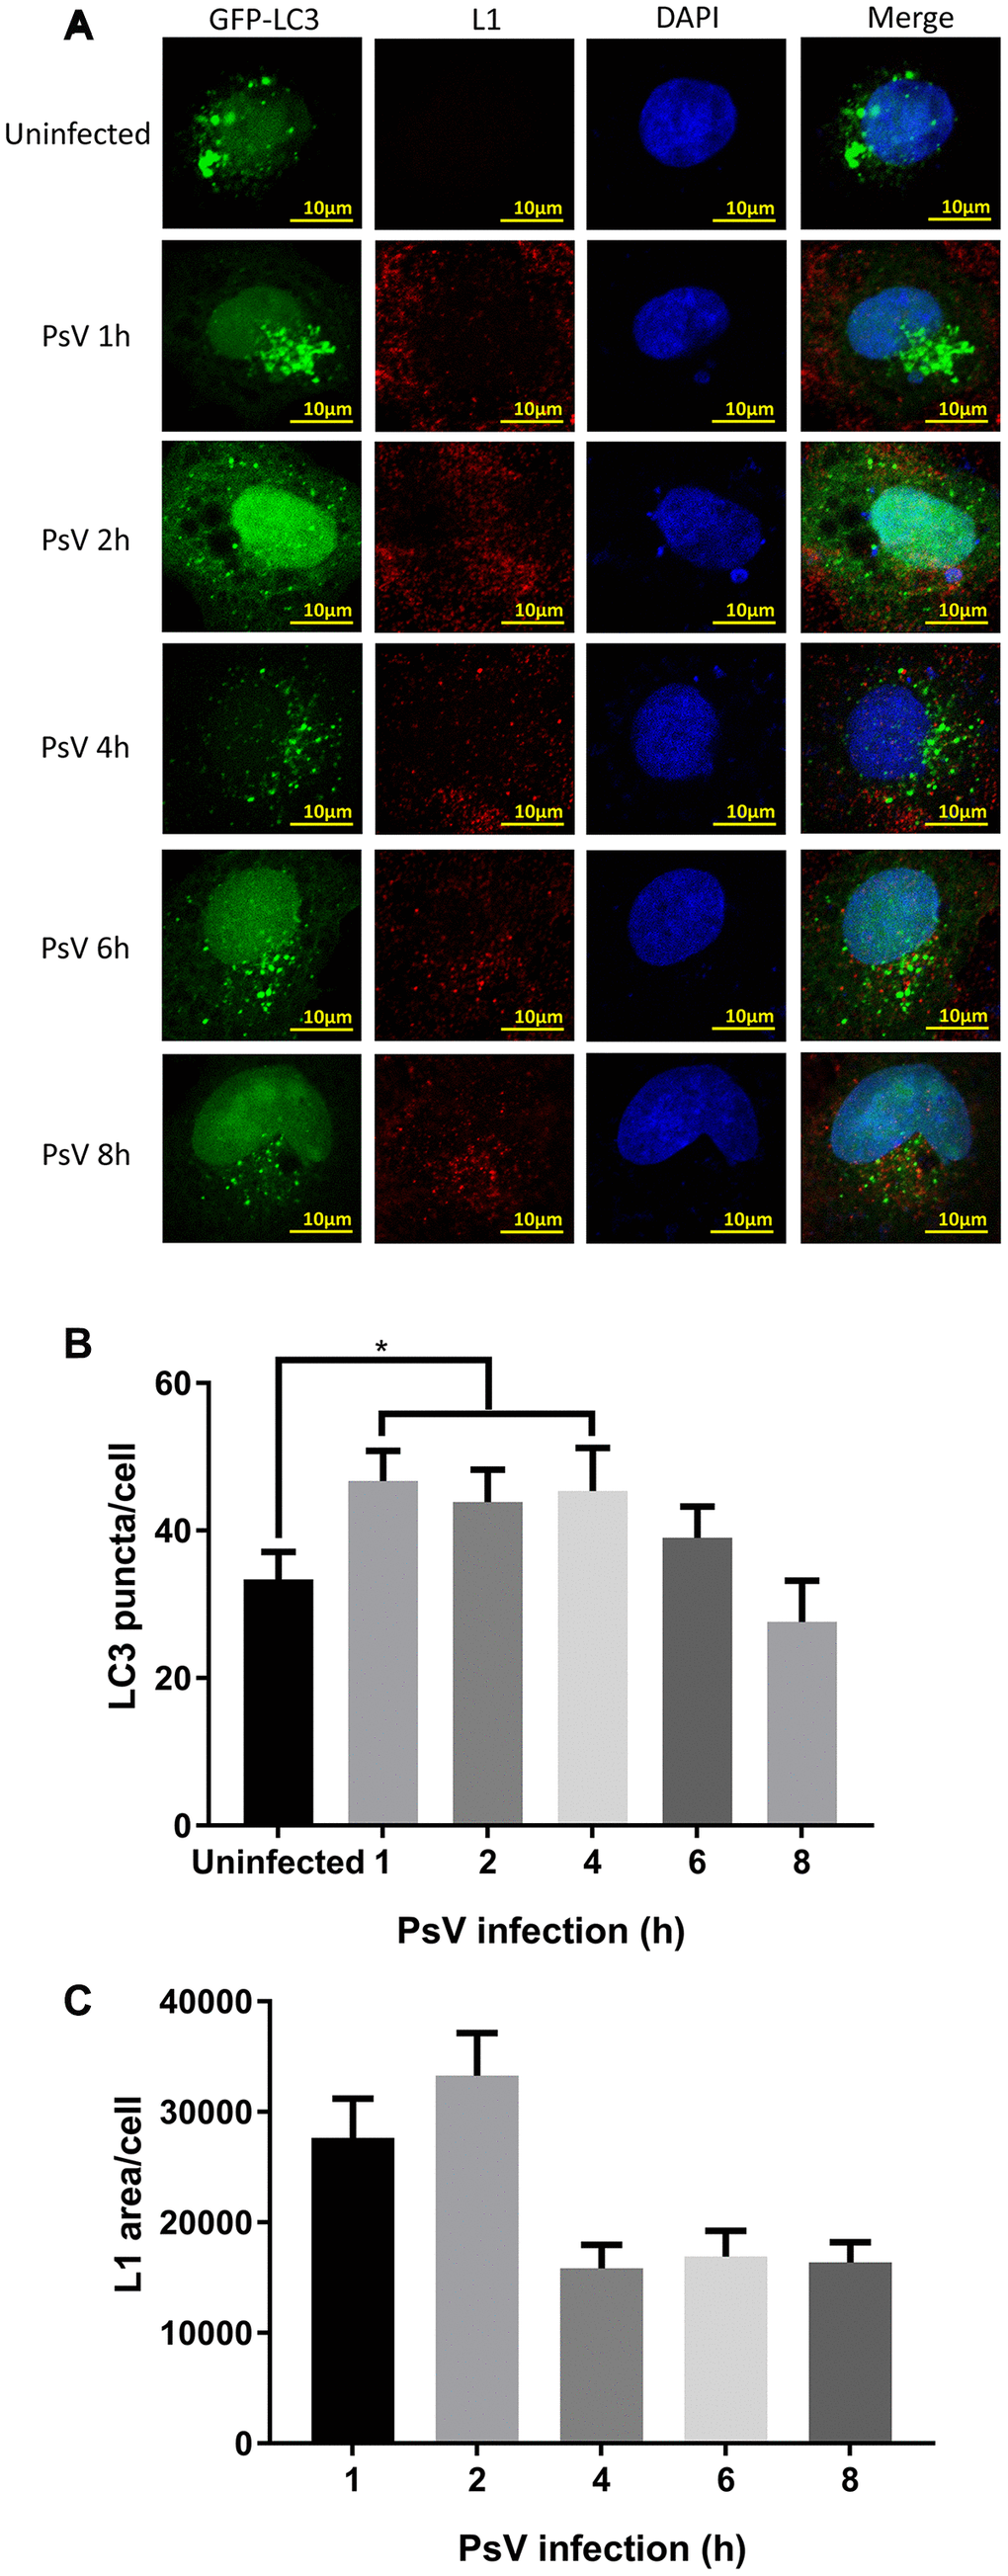 LC3 puncta are increased after HPV11 PsV infection of NHEK cells. (A) Confocal microscopy analysis of GFP-LC3 puncta and L1-stained HPV11 PsVs. The NHEK nucleus was stained with 4’,6-diamidino-2-phenylindole (DAPI). (B) Quantification of GFP-LC3 puncta in panel (A). (C) Quantification of the total L1 staining area in panel (A). The graphs represent the mean and standard deviation of three biological independent experiments, and at least 100 cells were analyzed for each repeat. Significant differences were identified by Student’s t test. *, P 